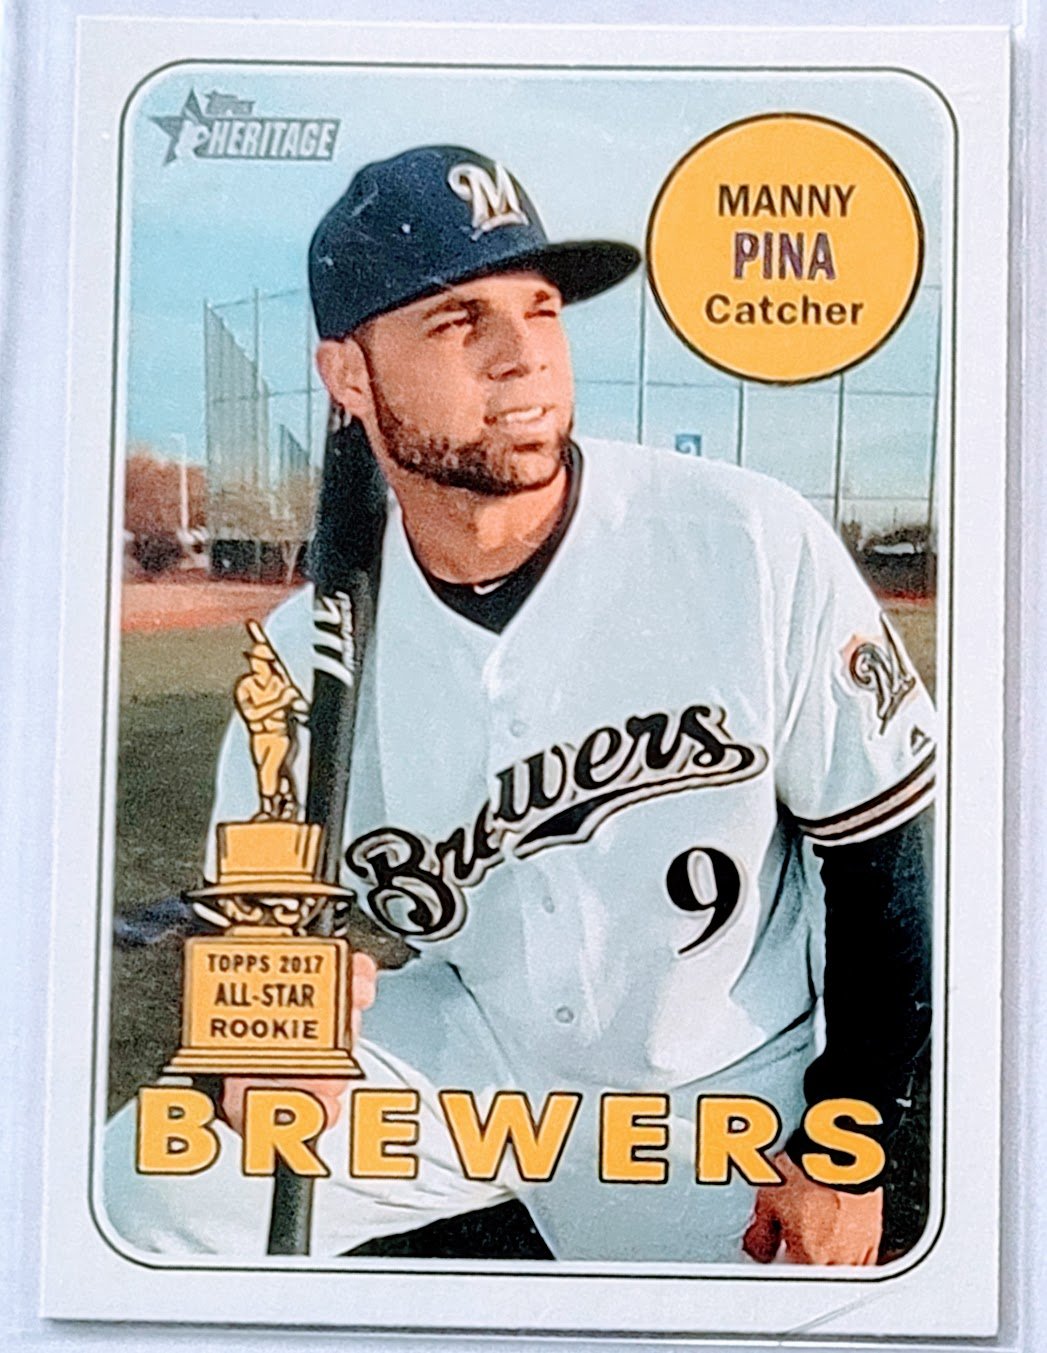 2018 Topps Heritage Manny Pina All Star Rookie Baseball Card TPTV simple Xclusive Collectibles   